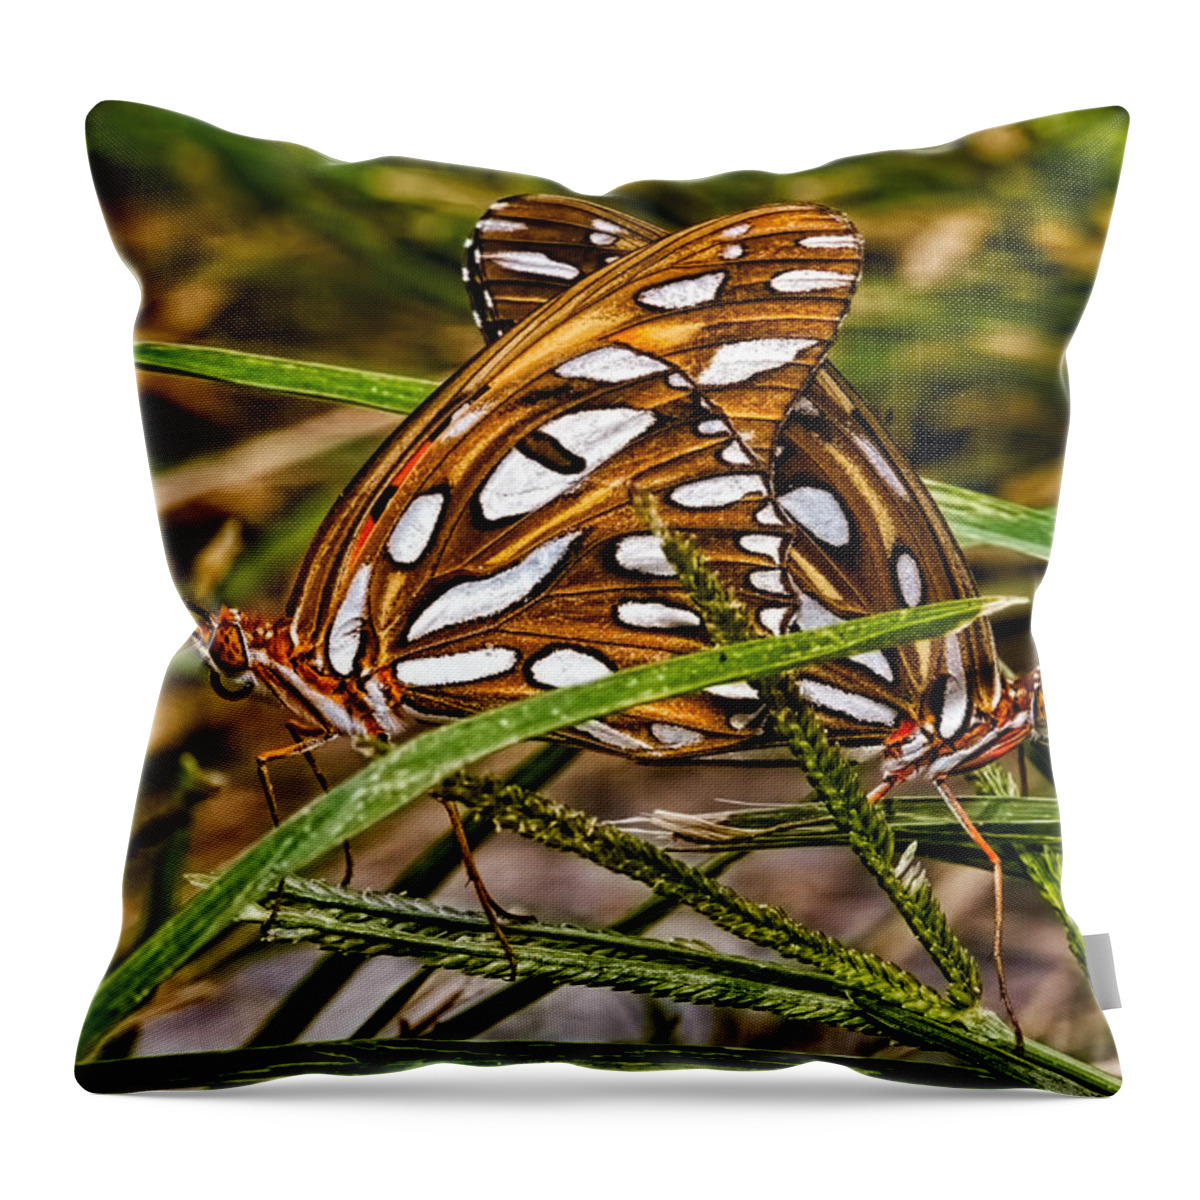 Photograph Throw Pillow featuring the photograph Two To Tango by Christopher Holmes